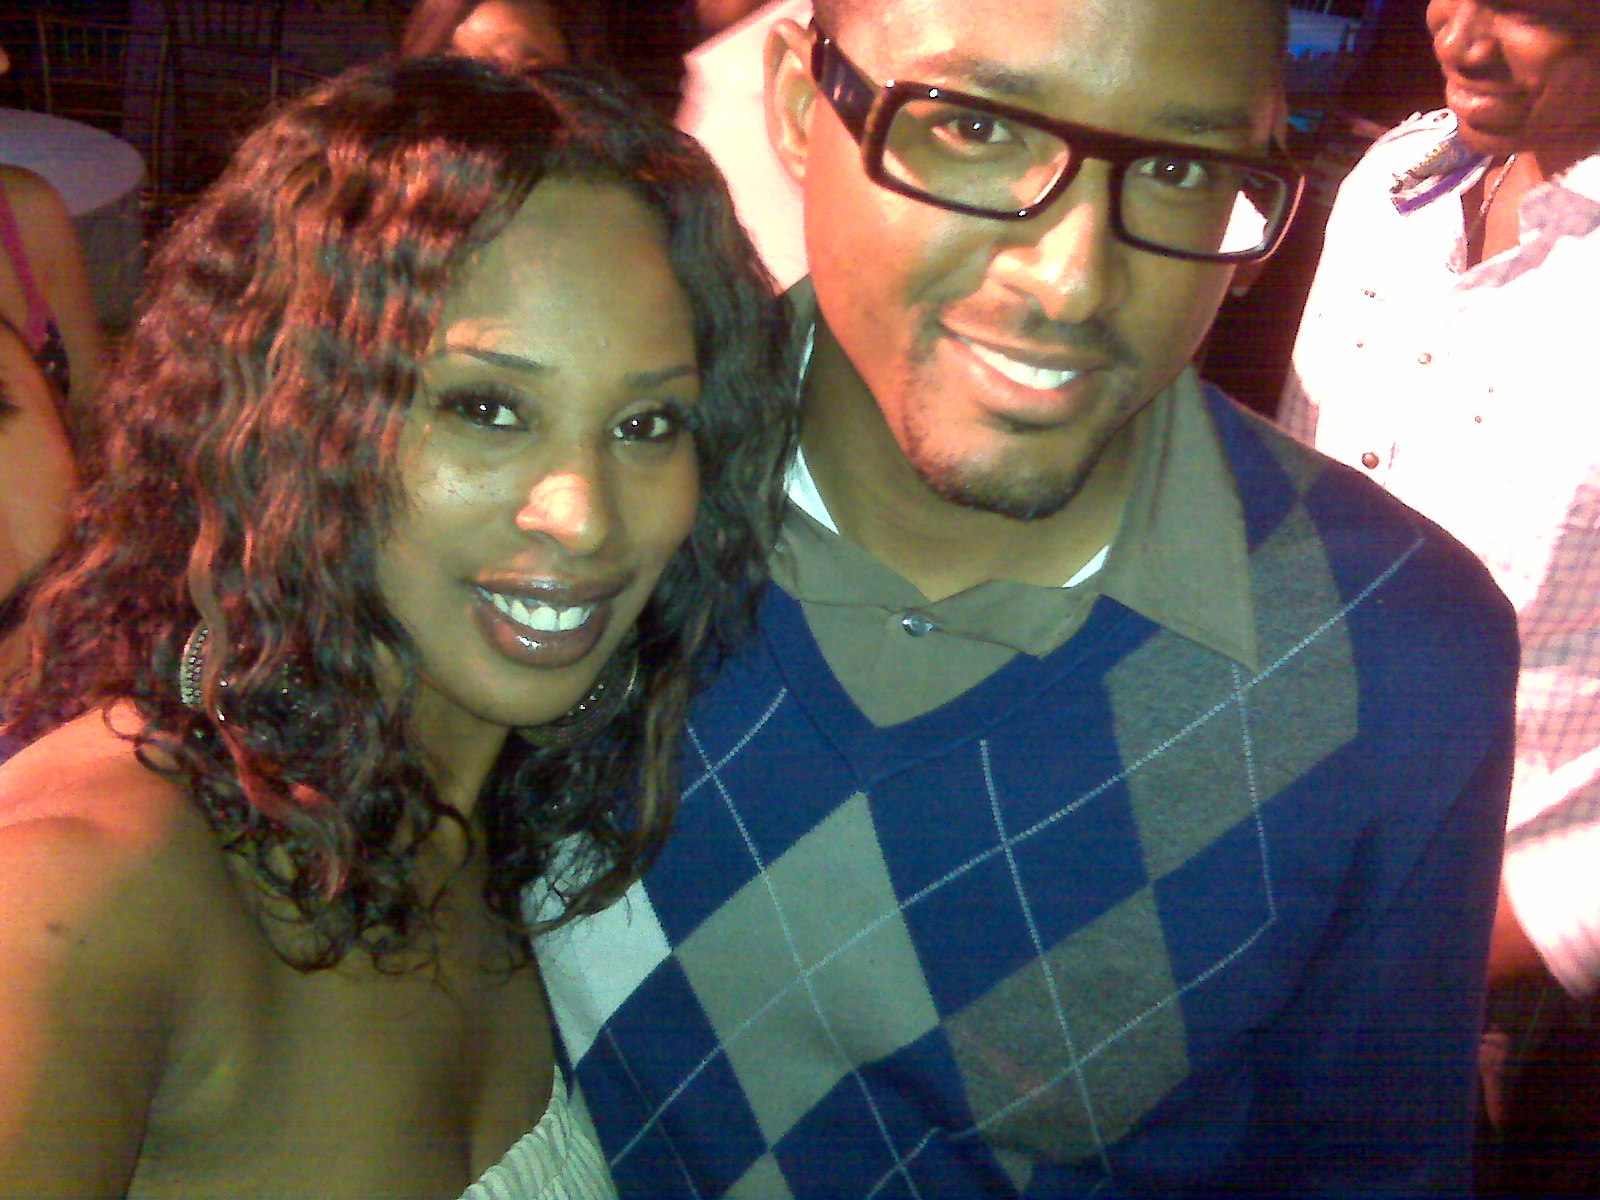 Actress Malika Blessing and Director Alton Glass at the Playboy Mansion Benefit Event